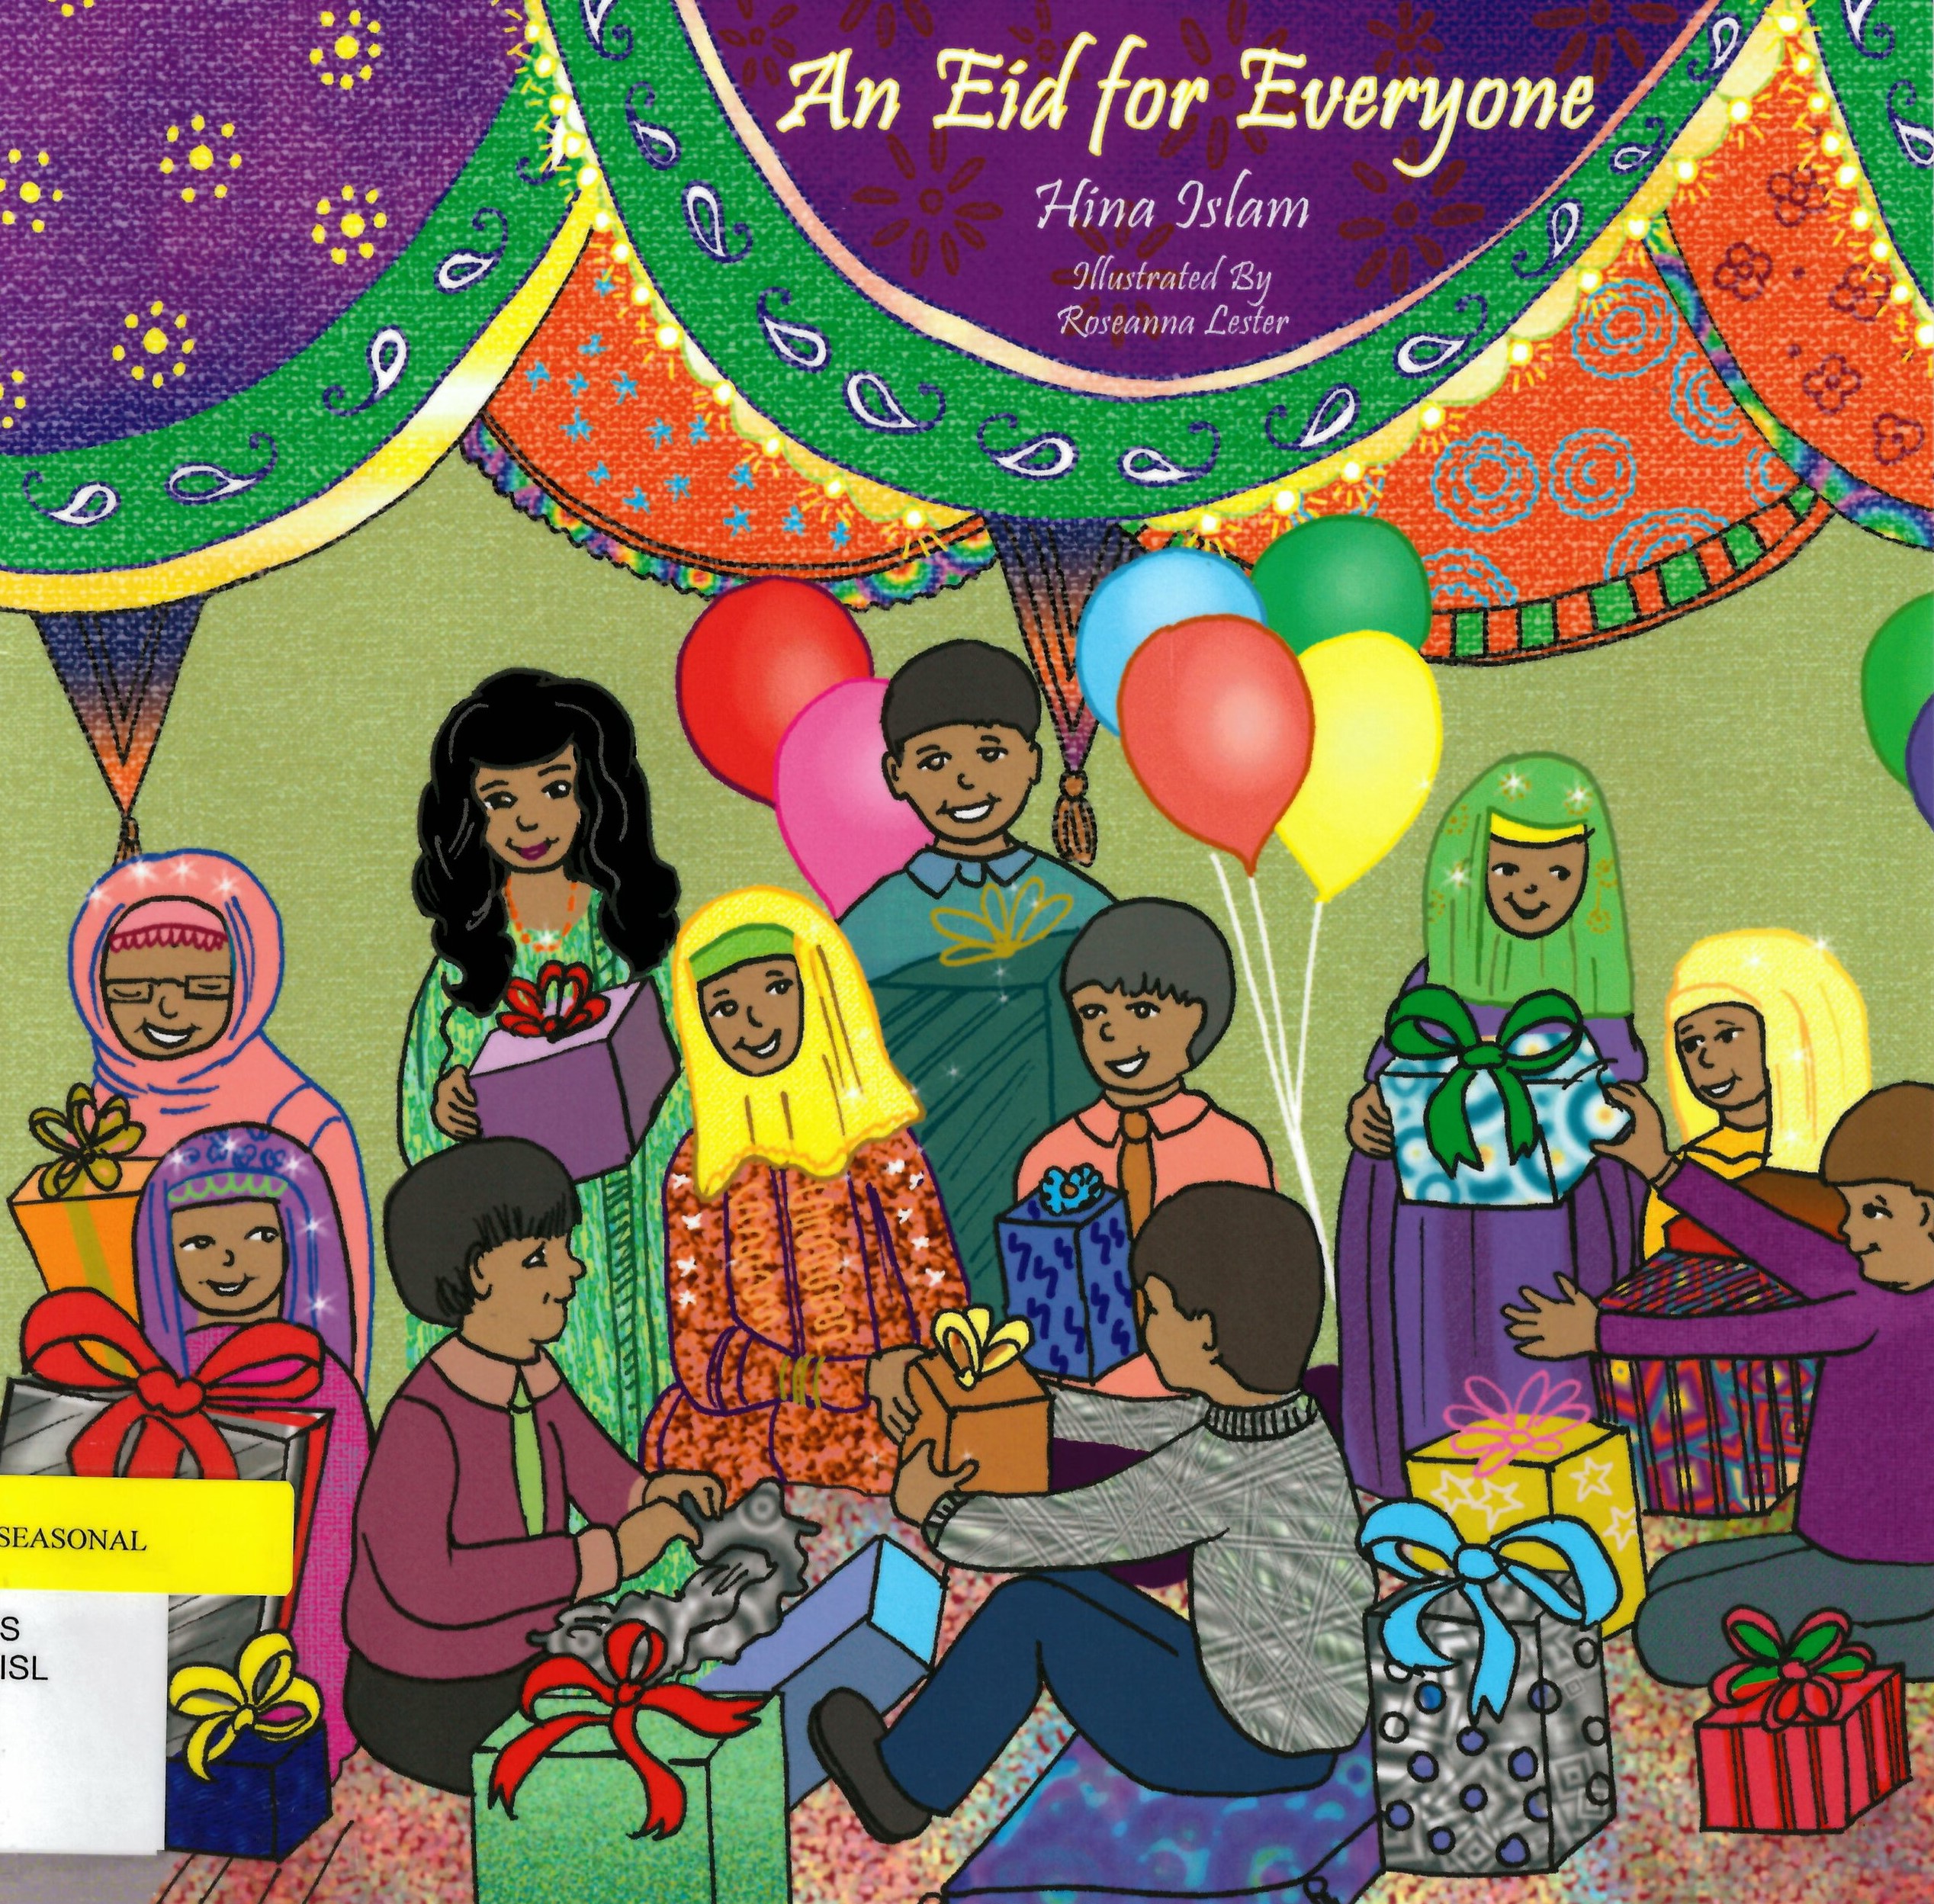 An eid for everyone